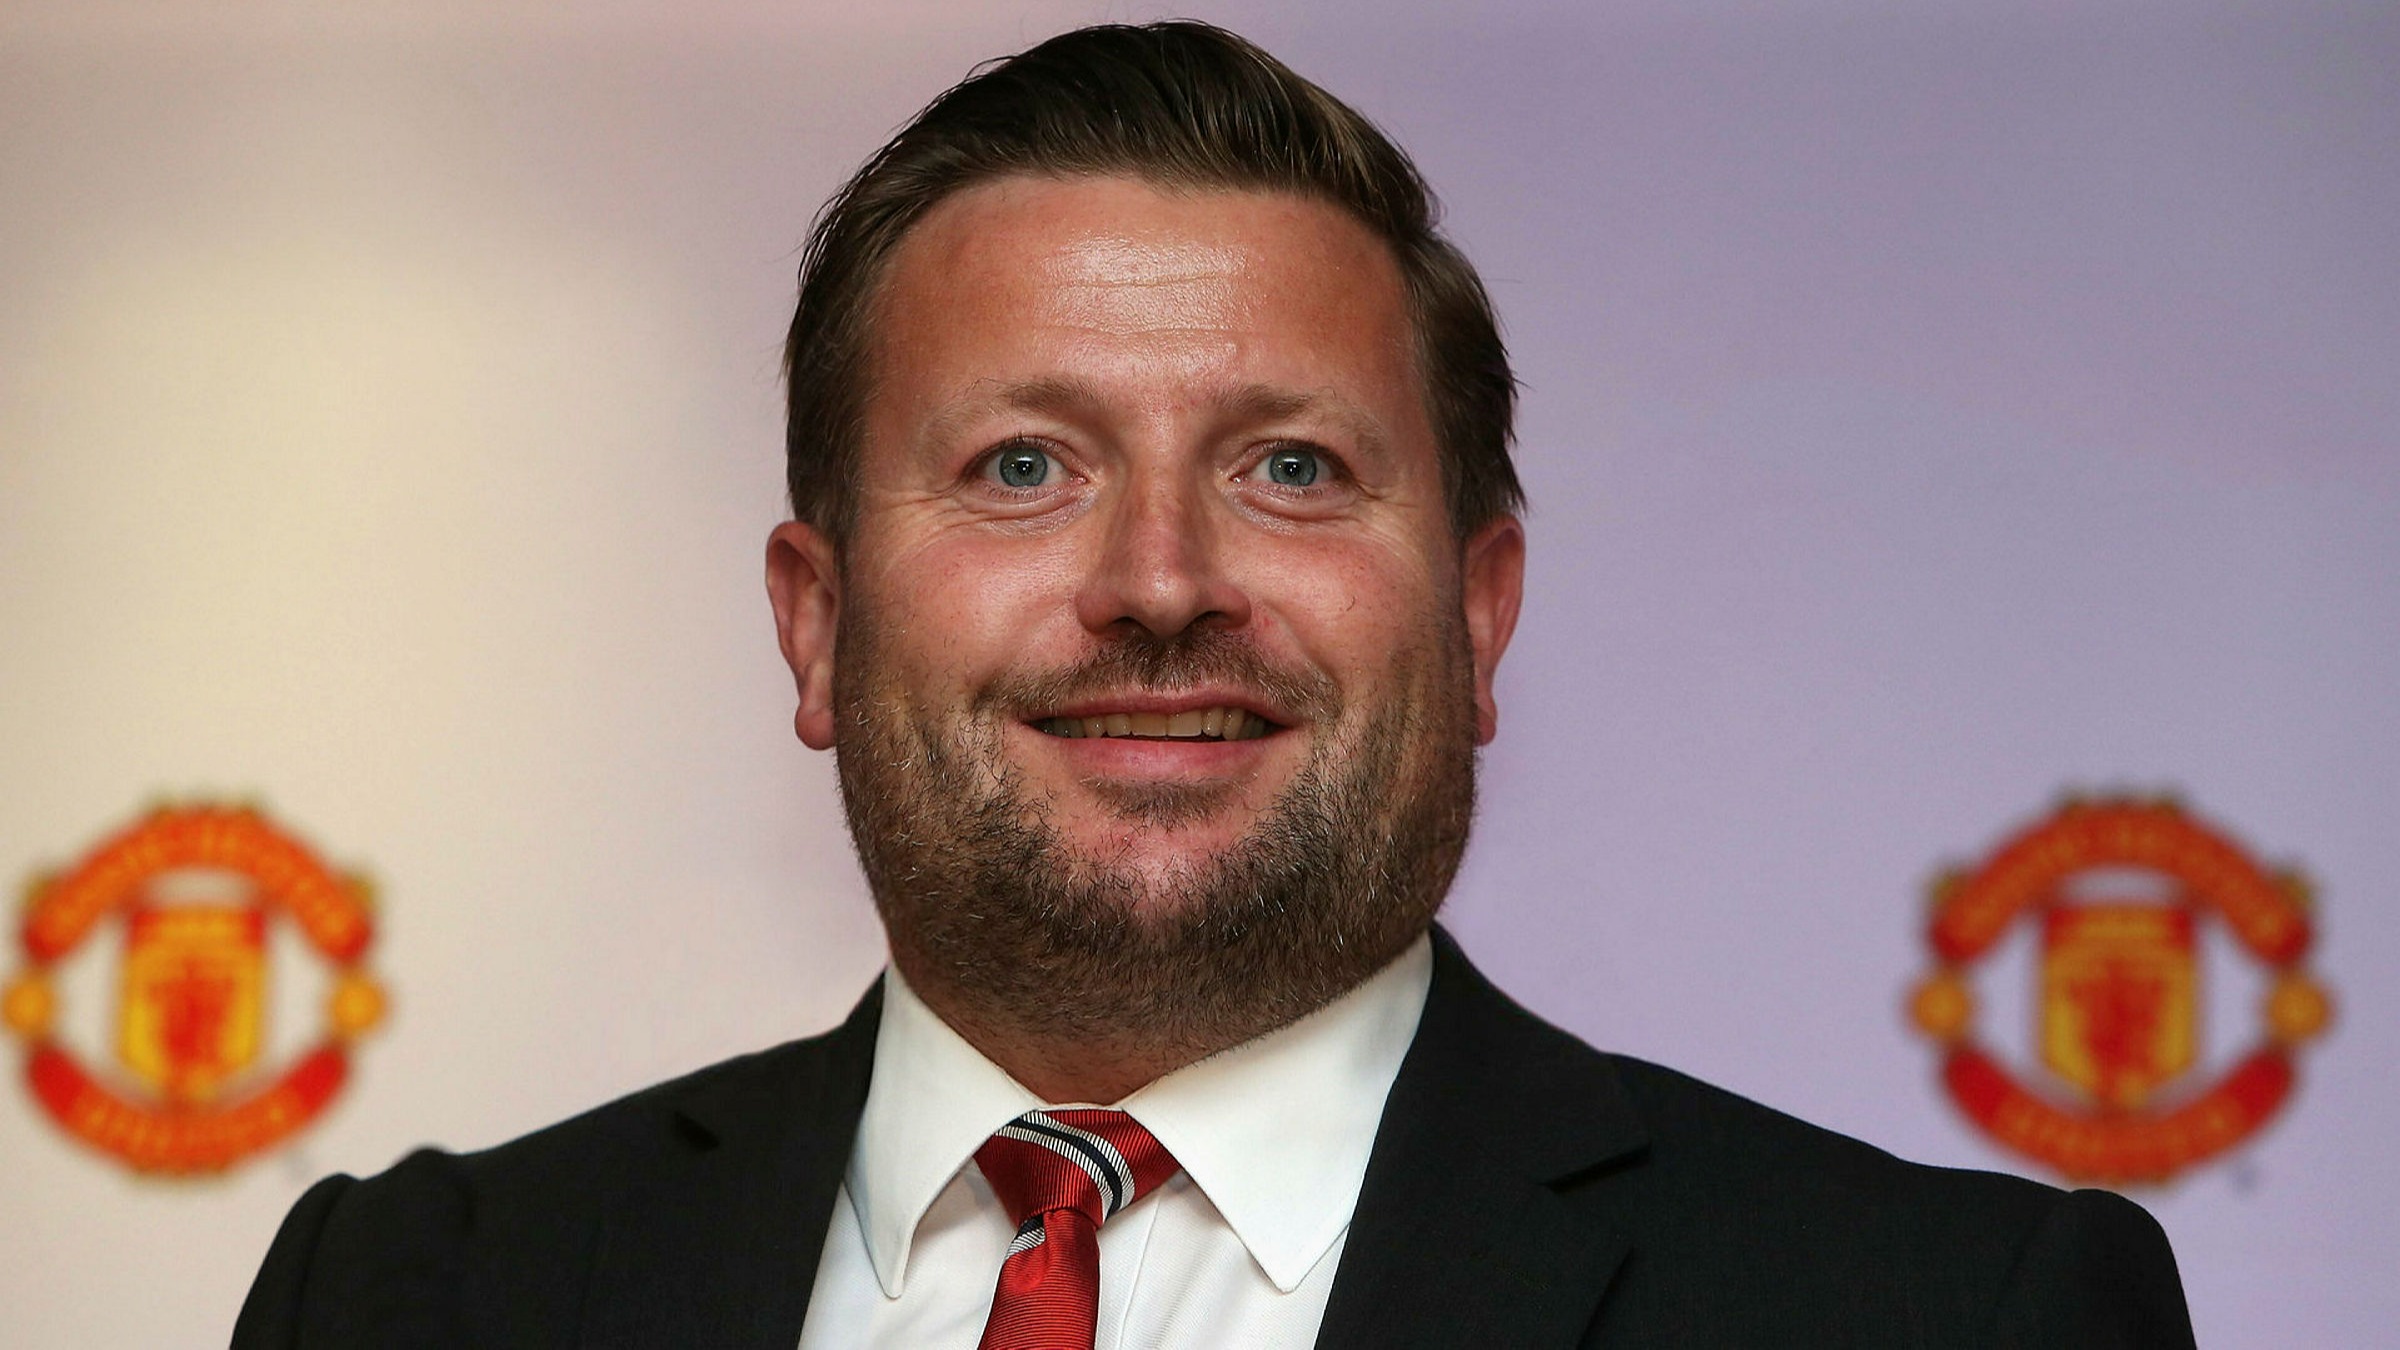 Manchester United appoints Richard Arnold as new chief | Financial Times